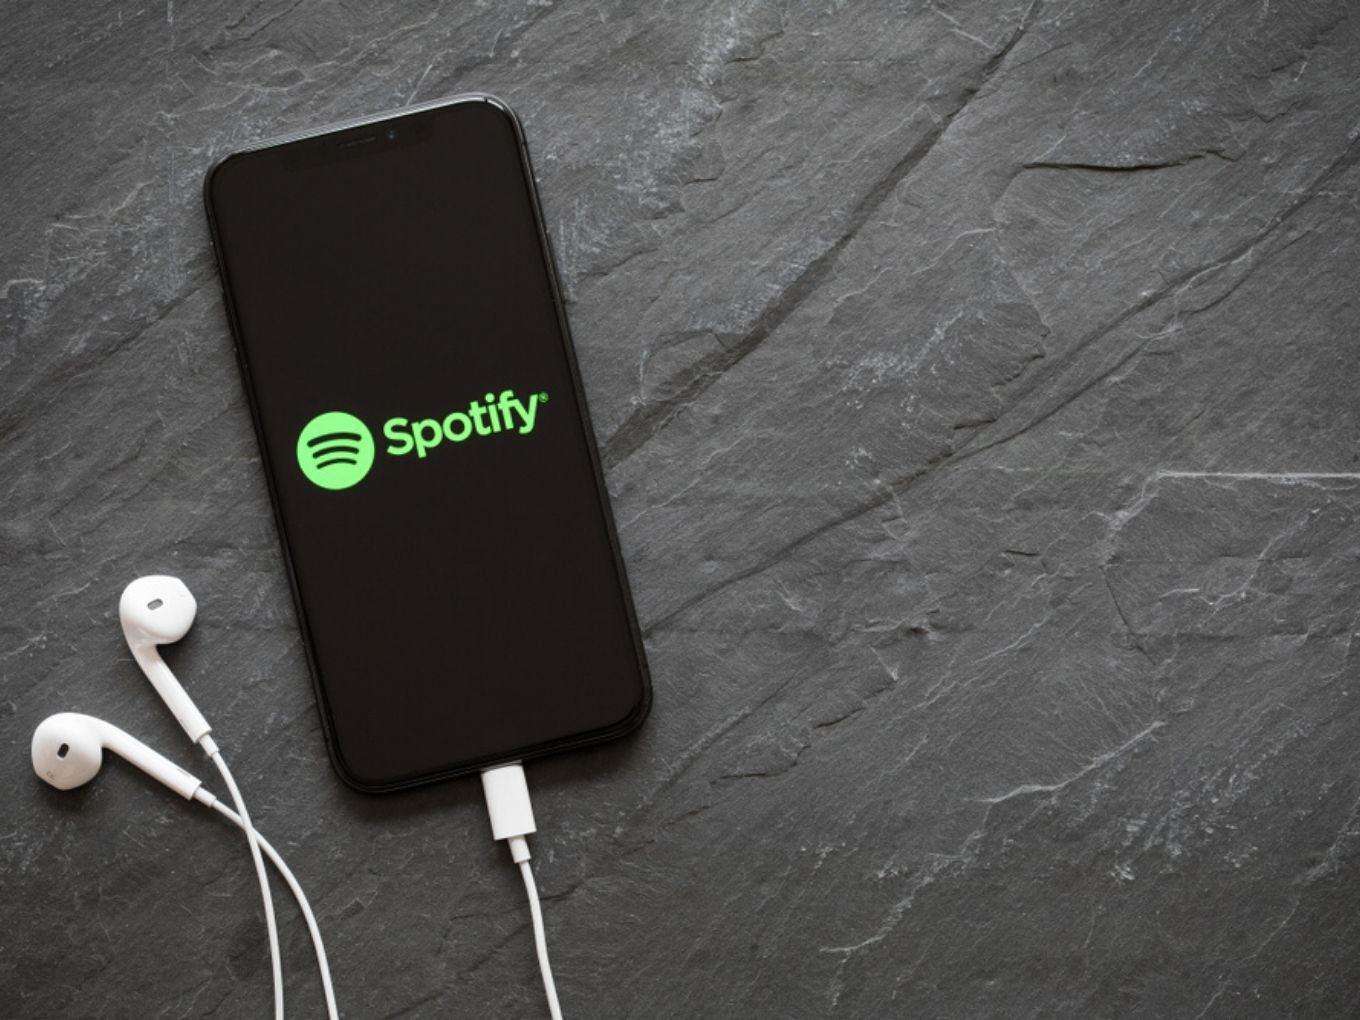 Despite The Competition, Spotify Outperforms Expectations In India